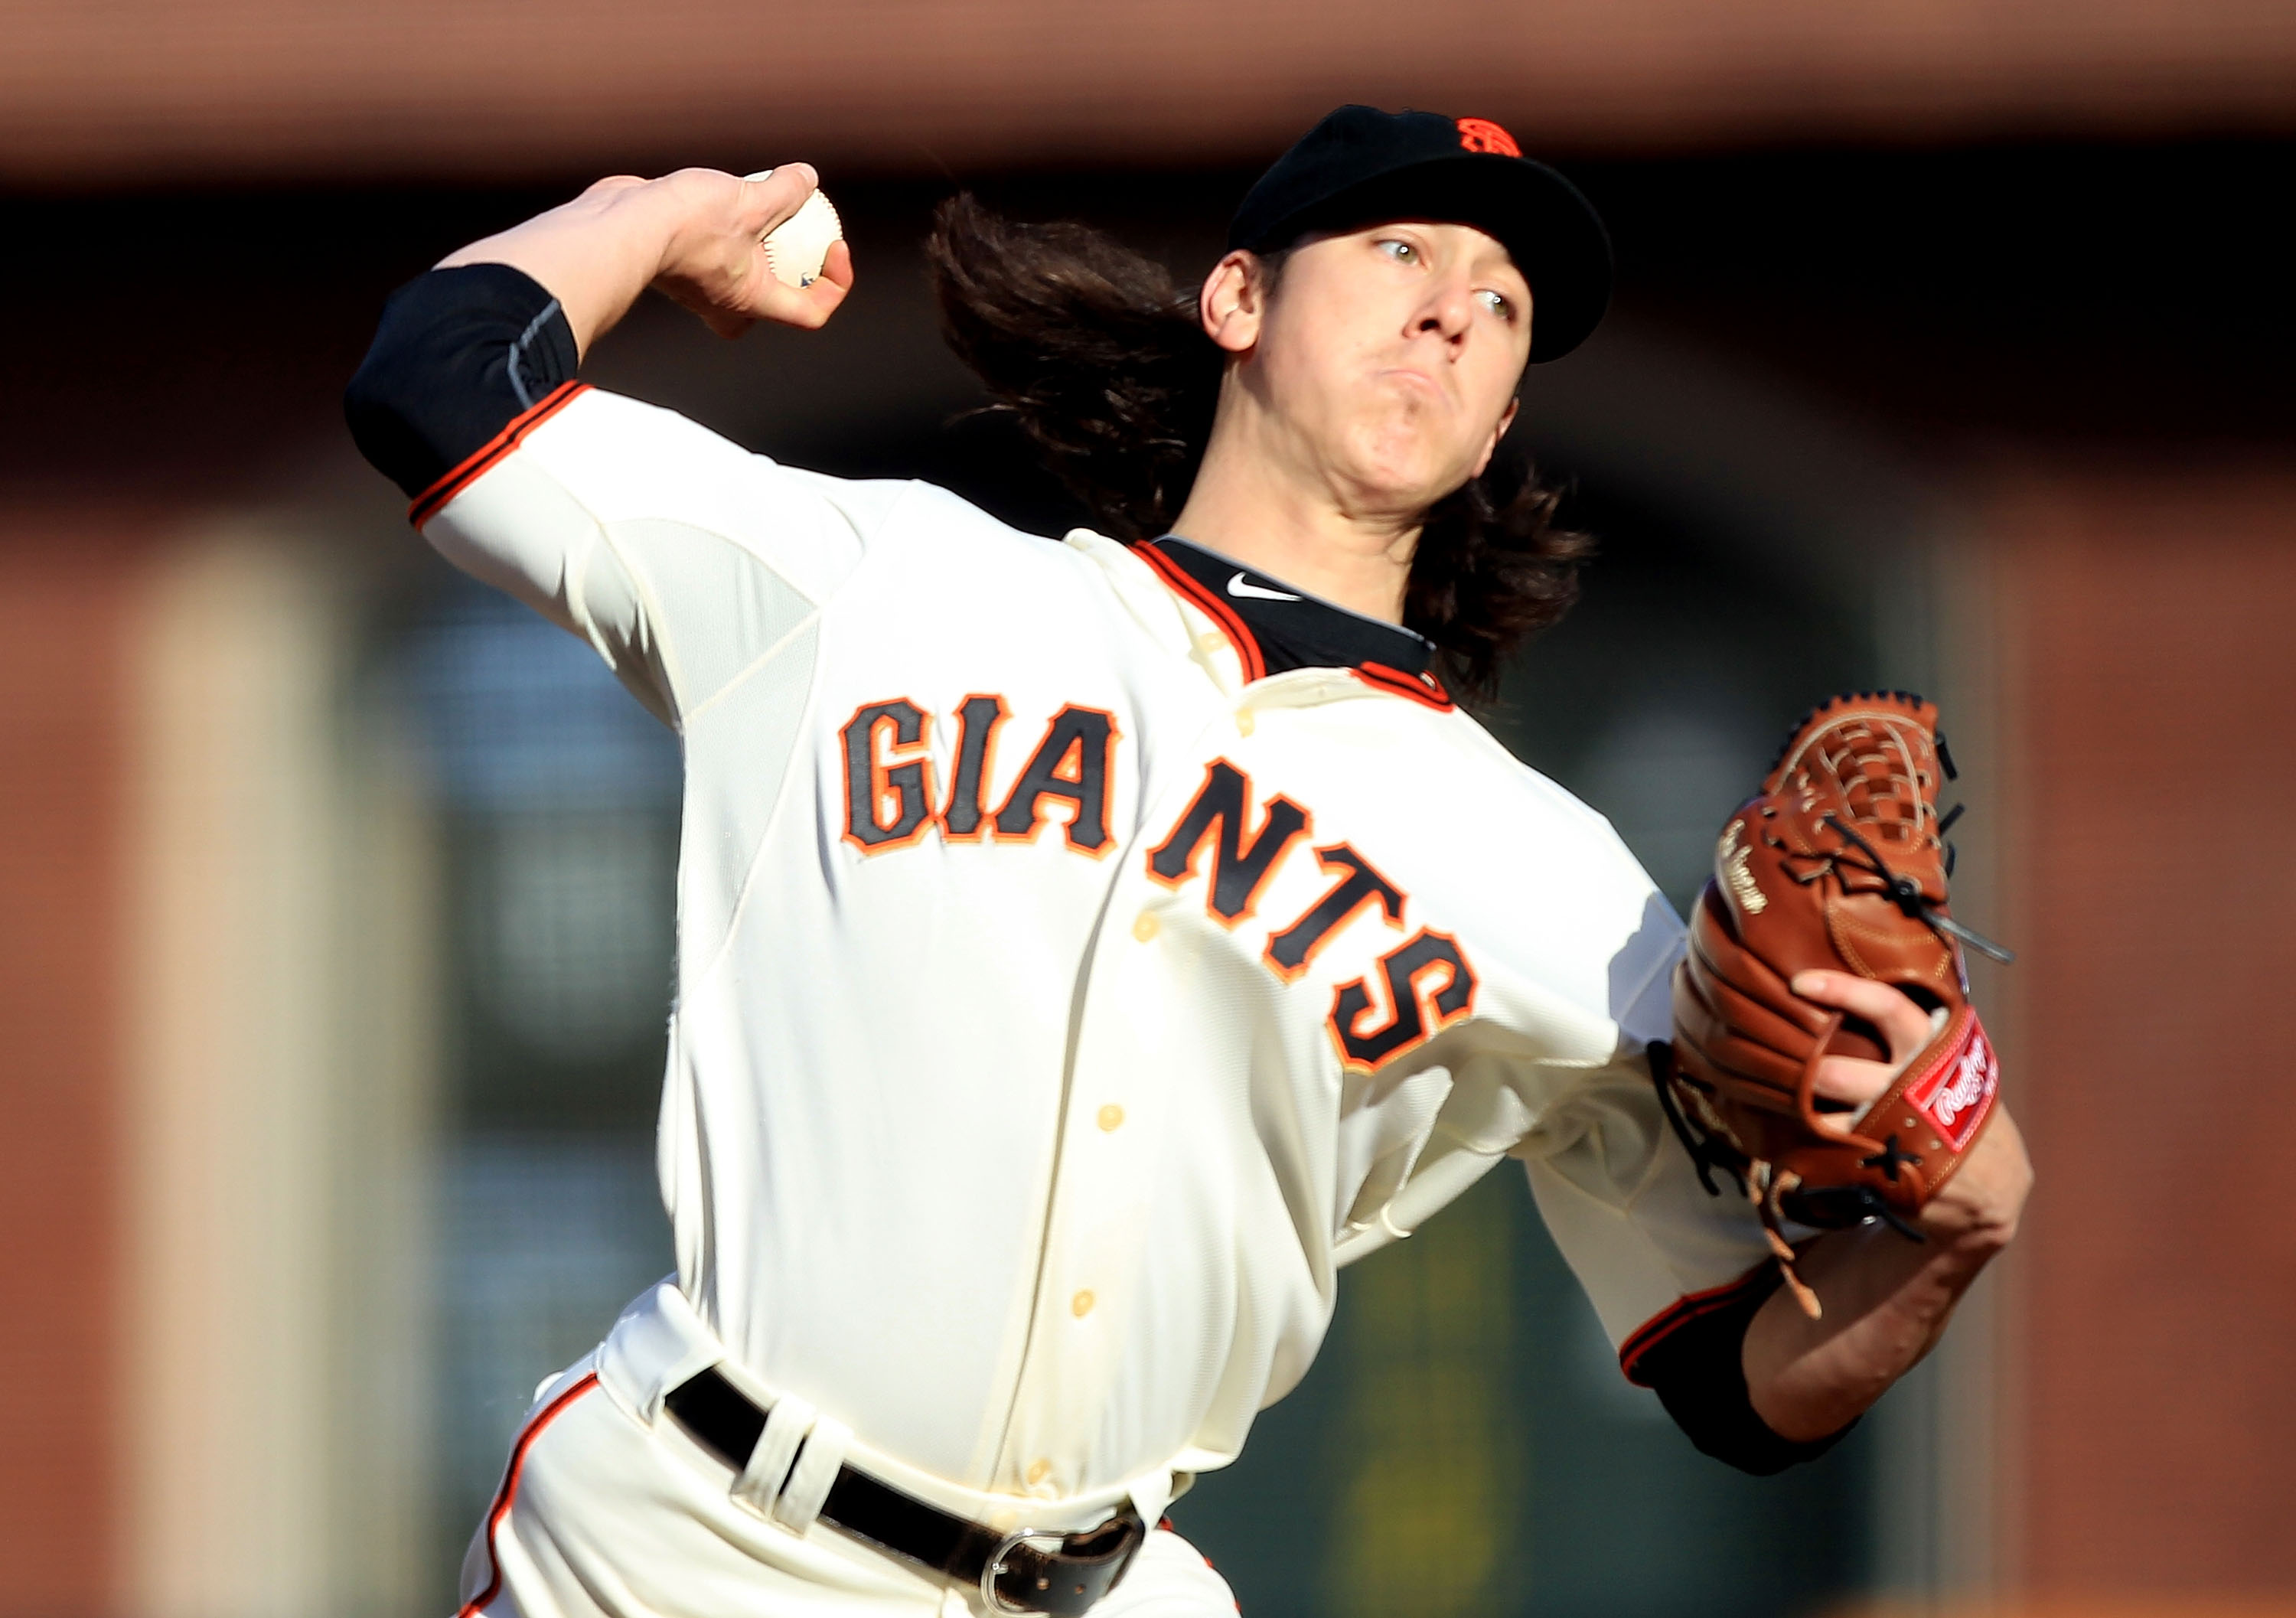 SAN FRANCISCO, CA - MAY 21:  Tim Lincecum #55 of the San Francisco Giants pitches against the Oakland Athletics during an MLB game at AT&T Park on May 21, 2011 in San Francisco, California.  (Photo by Jed Jacobsohn/Getty Images)